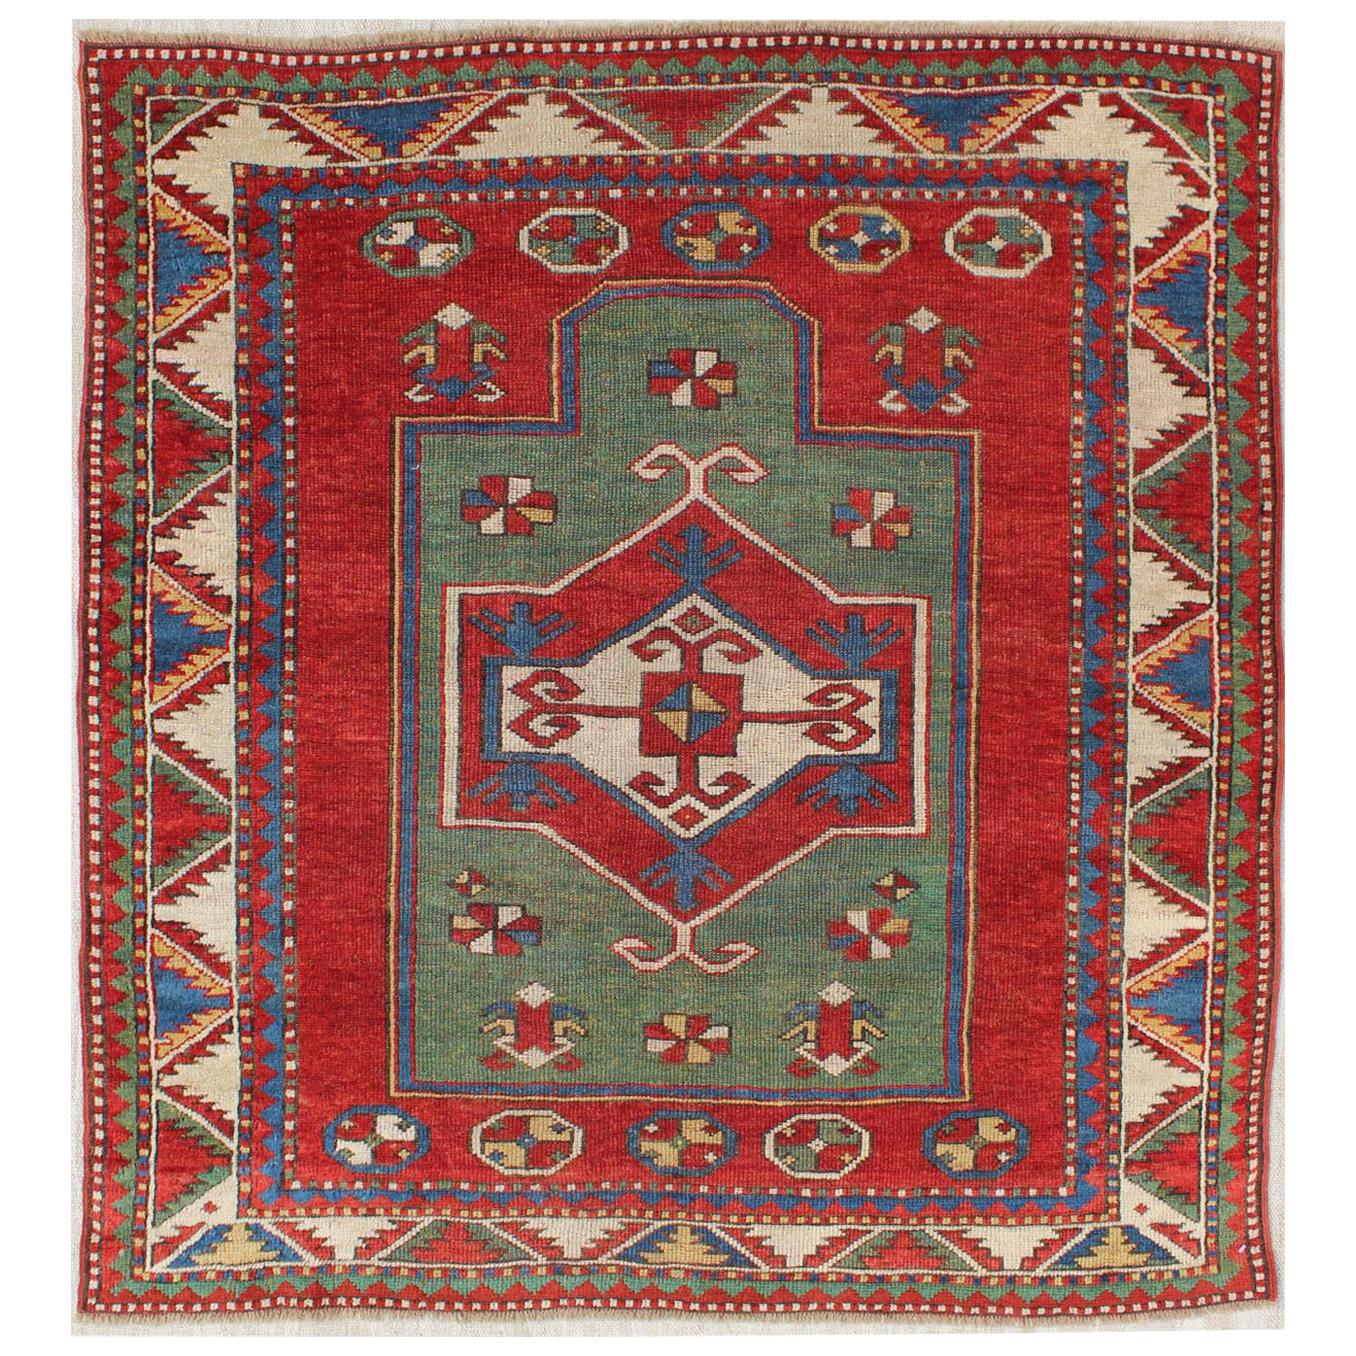 Antique Caucasian Fachralo Kazak with Tribal Design in Green, Red and Ivory